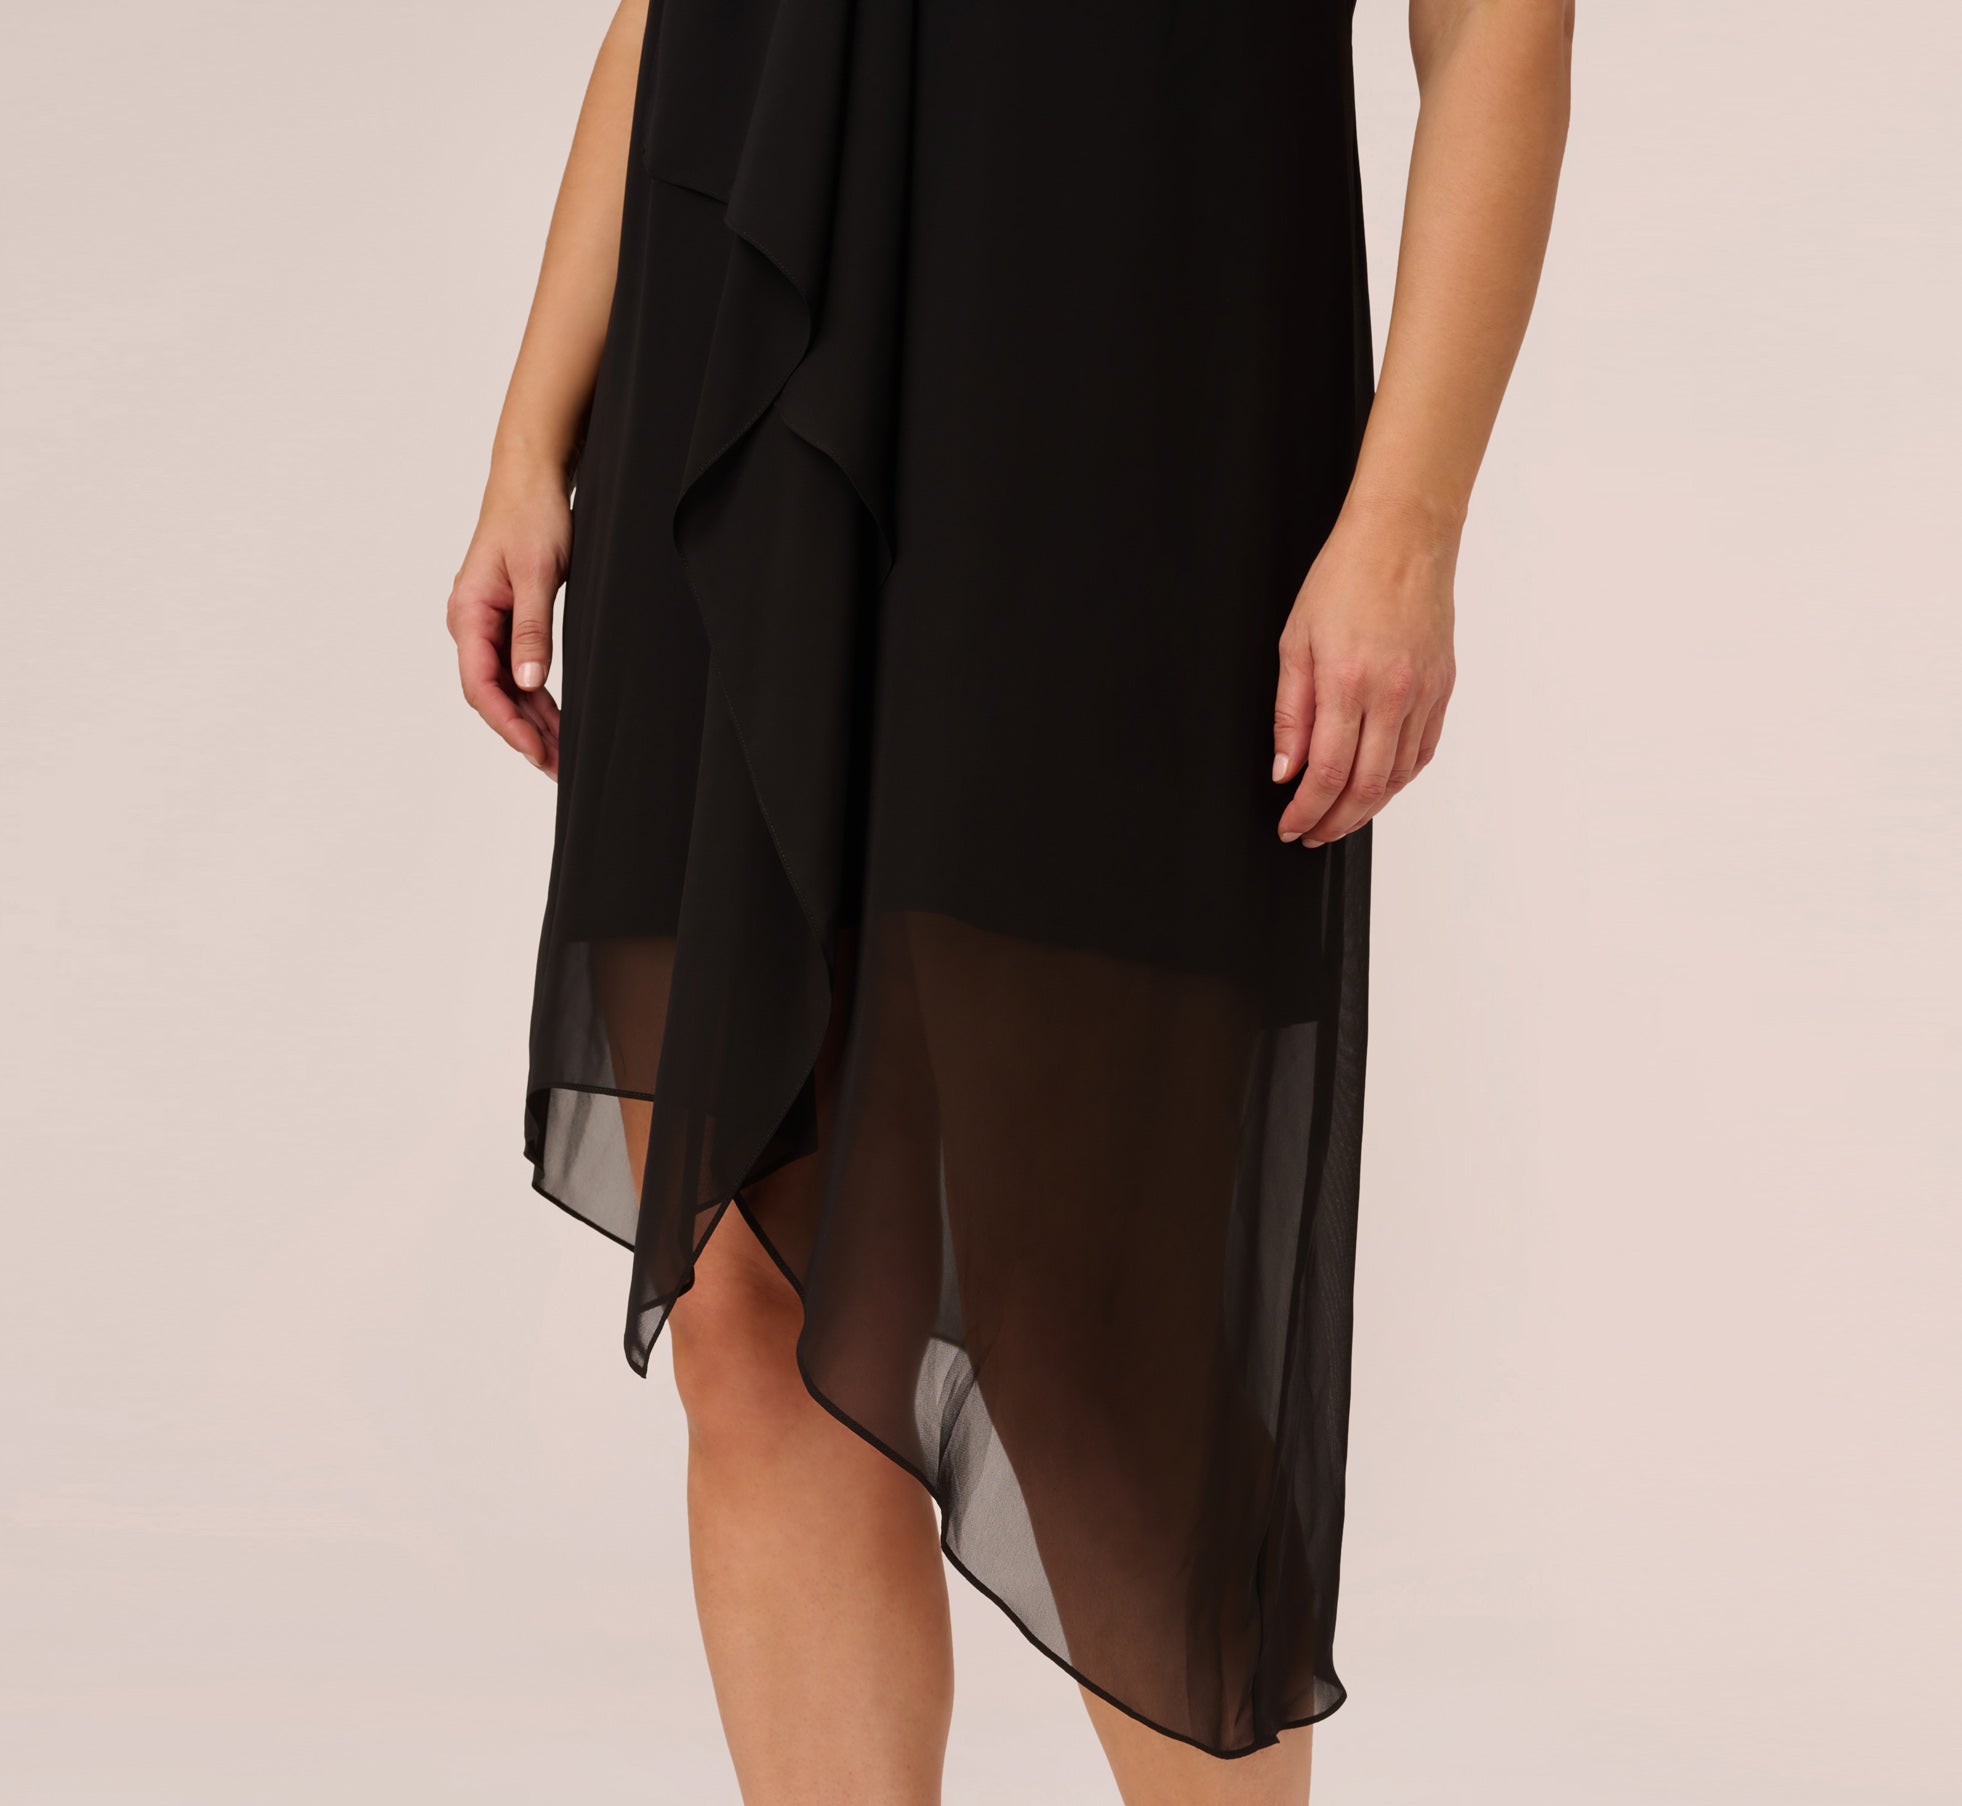 Plus Size Sleeveless Chiffon Dress With Cascading Details In Black